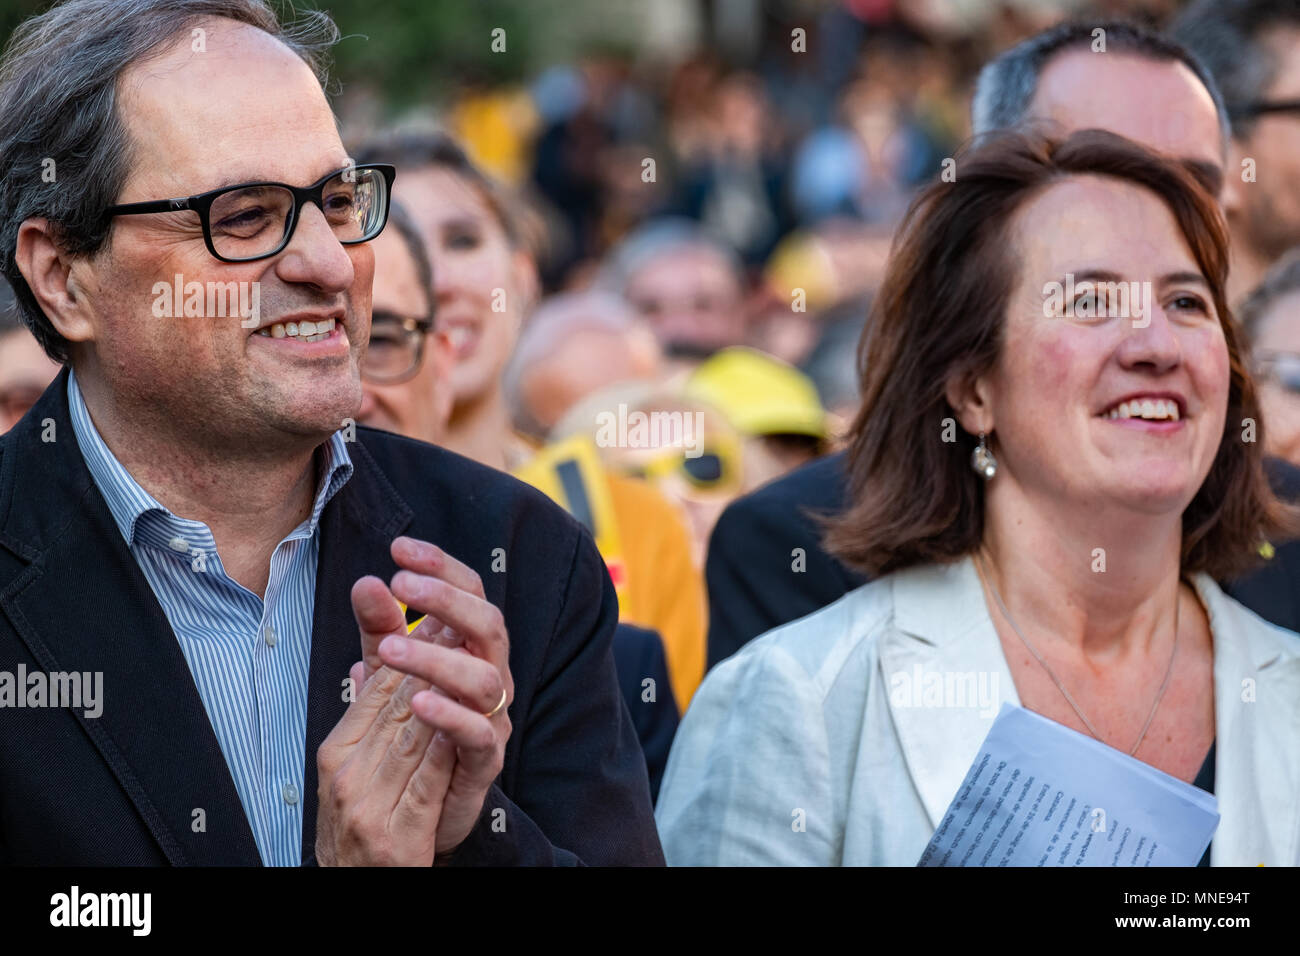 President Qim Torra is seen next to Elisenda Paluzier, president of ANC. Act of protest to request the release of political prisoners Jordi Sànchez and Jordi Cuixart who have been in prison for seven months. It is the circumstance that it has been the first act in Catalonia of the president-elect of the Generalitat Qim Torra who has attended the rally. Stock Photo